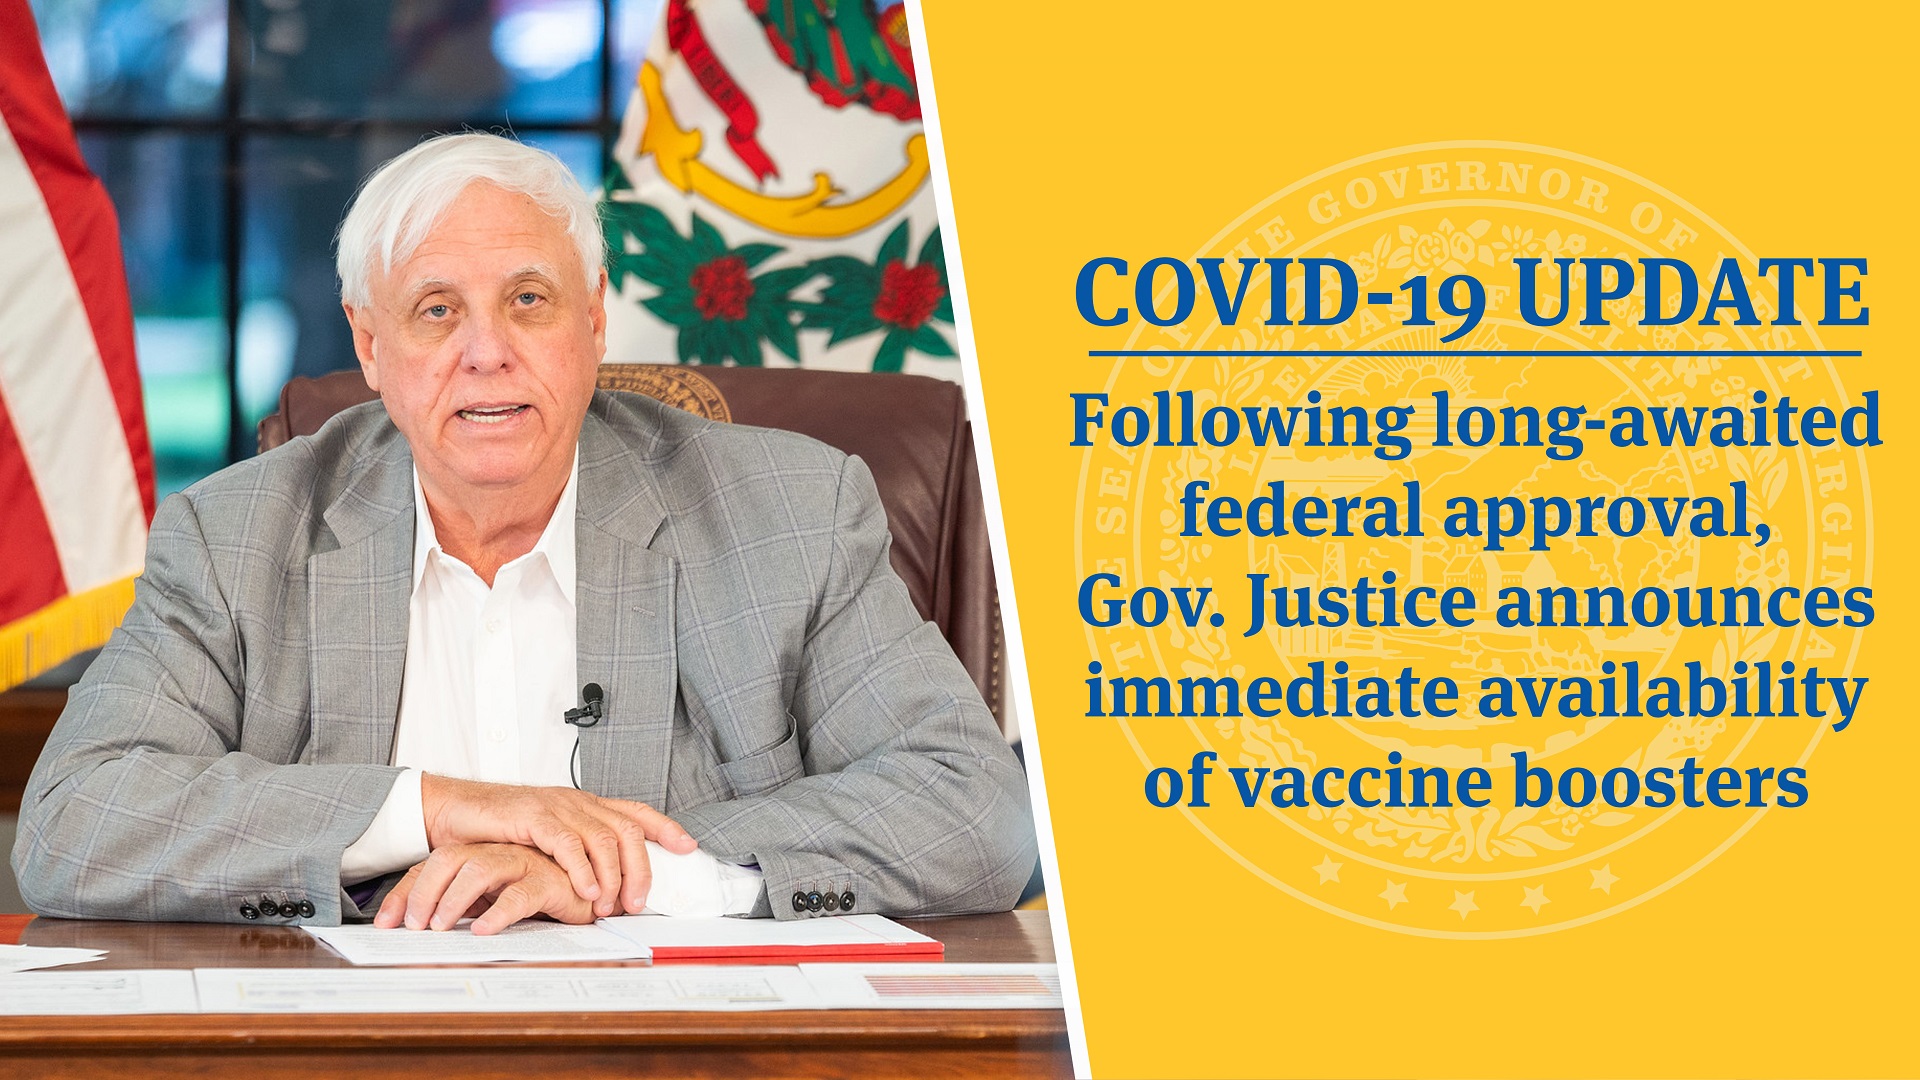 COVID19 UPDATE Following longawaited federal approval, Gov. Justice